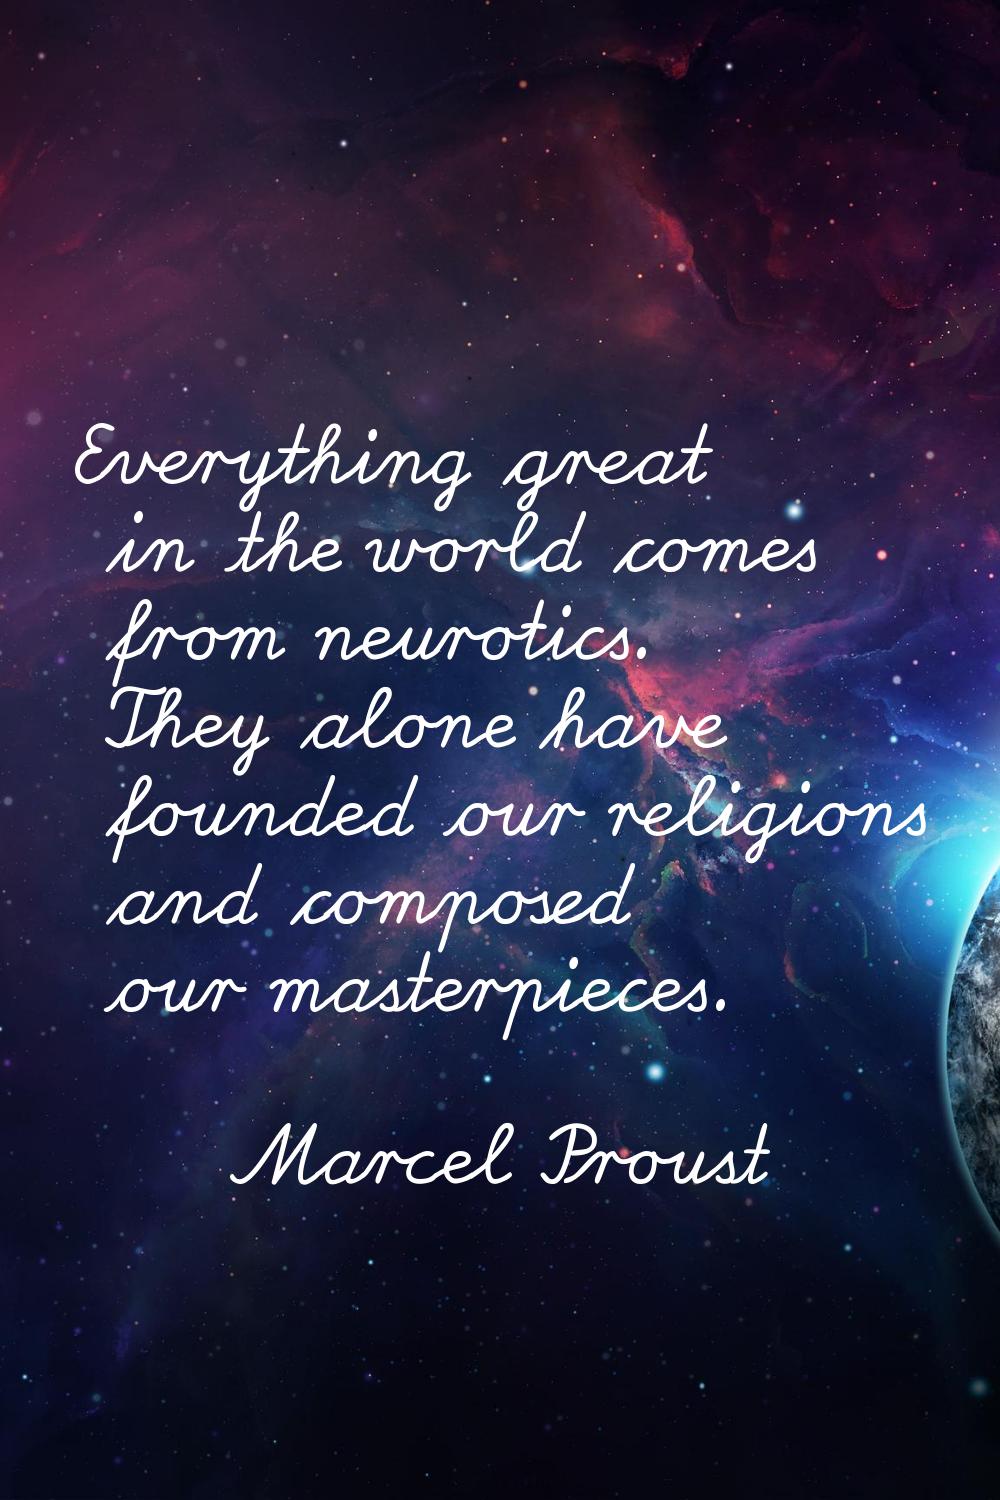 Everything great in the world comes from neurotics. They alone have founded our religions and compo